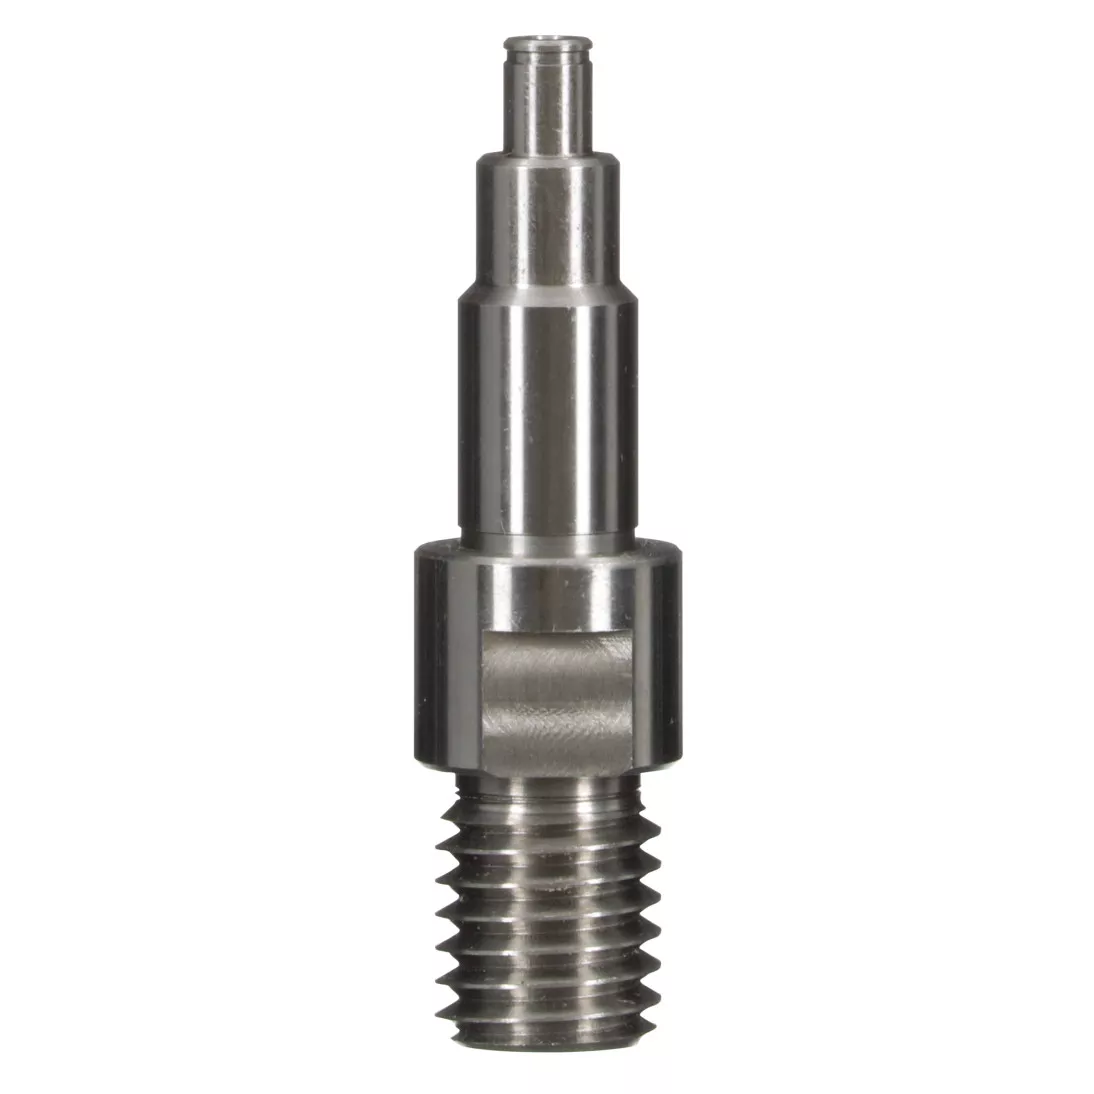 3M™ Output Spindle 5/8 in-11 Thread 55112